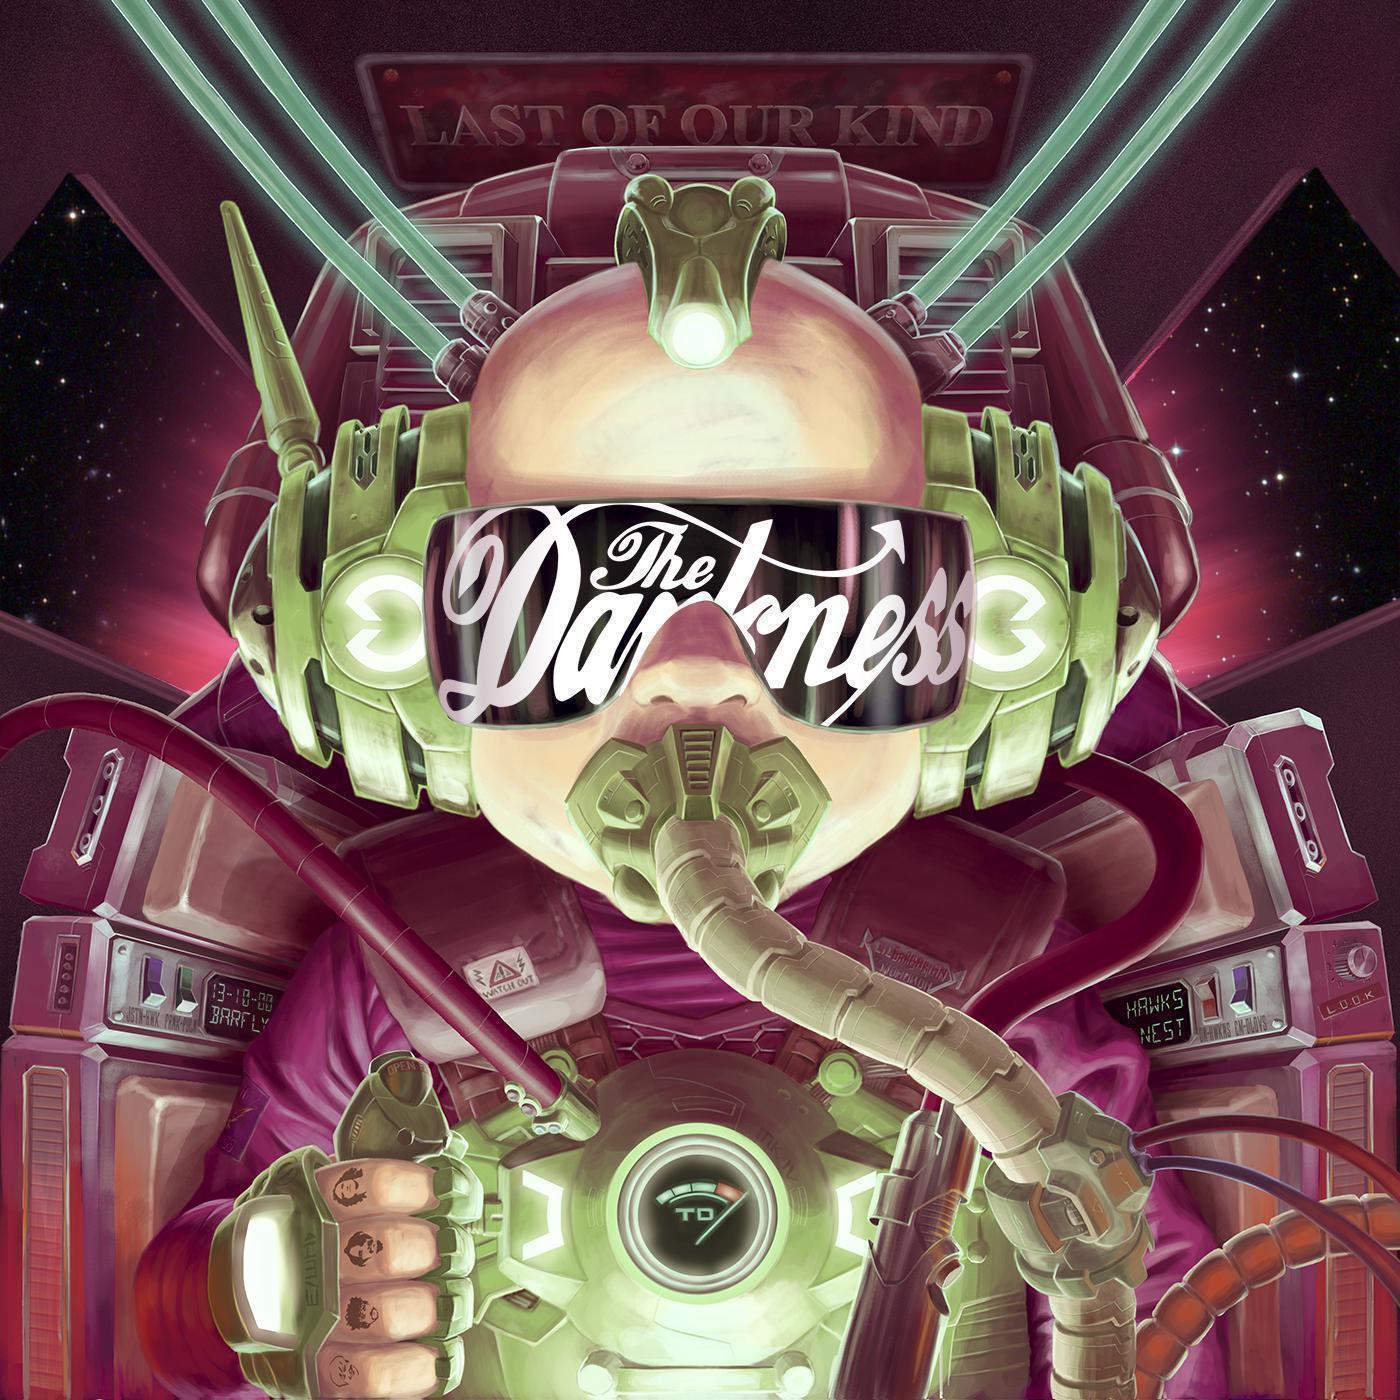 The Darkness - Last Of Our Kind (2015) 24bit FLAC Download